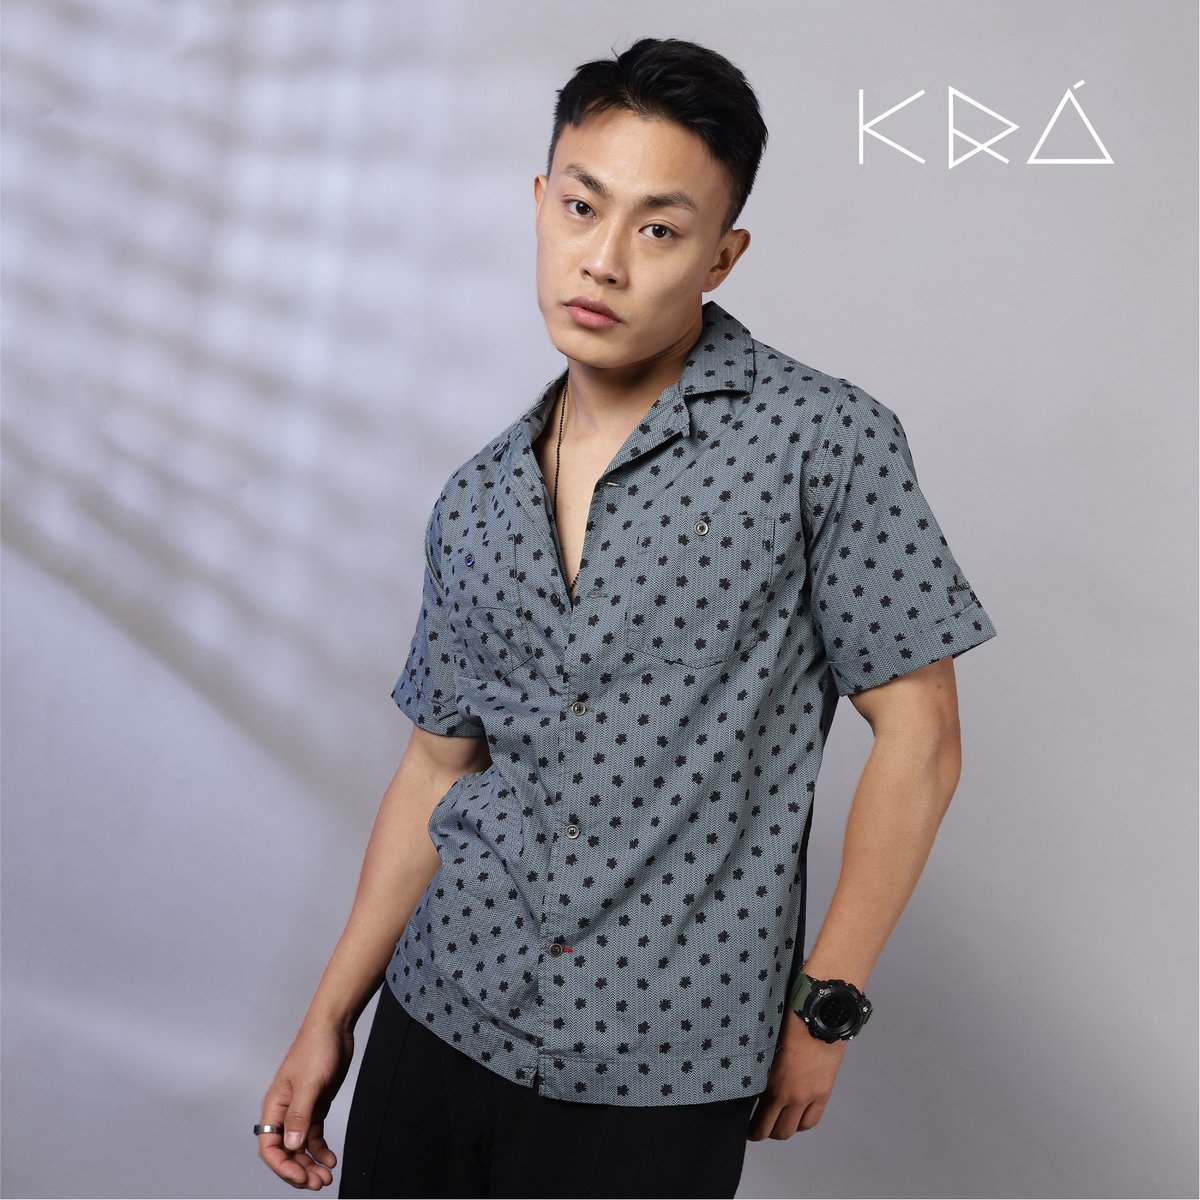 This snazzy printed Cuban shirt will put you in the spotlight instantly. Bag it at thisiskra.com - link in bio!
.
.
.
.
#YouDoYou #Krasified #indianstreetwear #streetculture #streetwear #casualwear #Cubantee #Streetwear #casualapparel #summercollection22